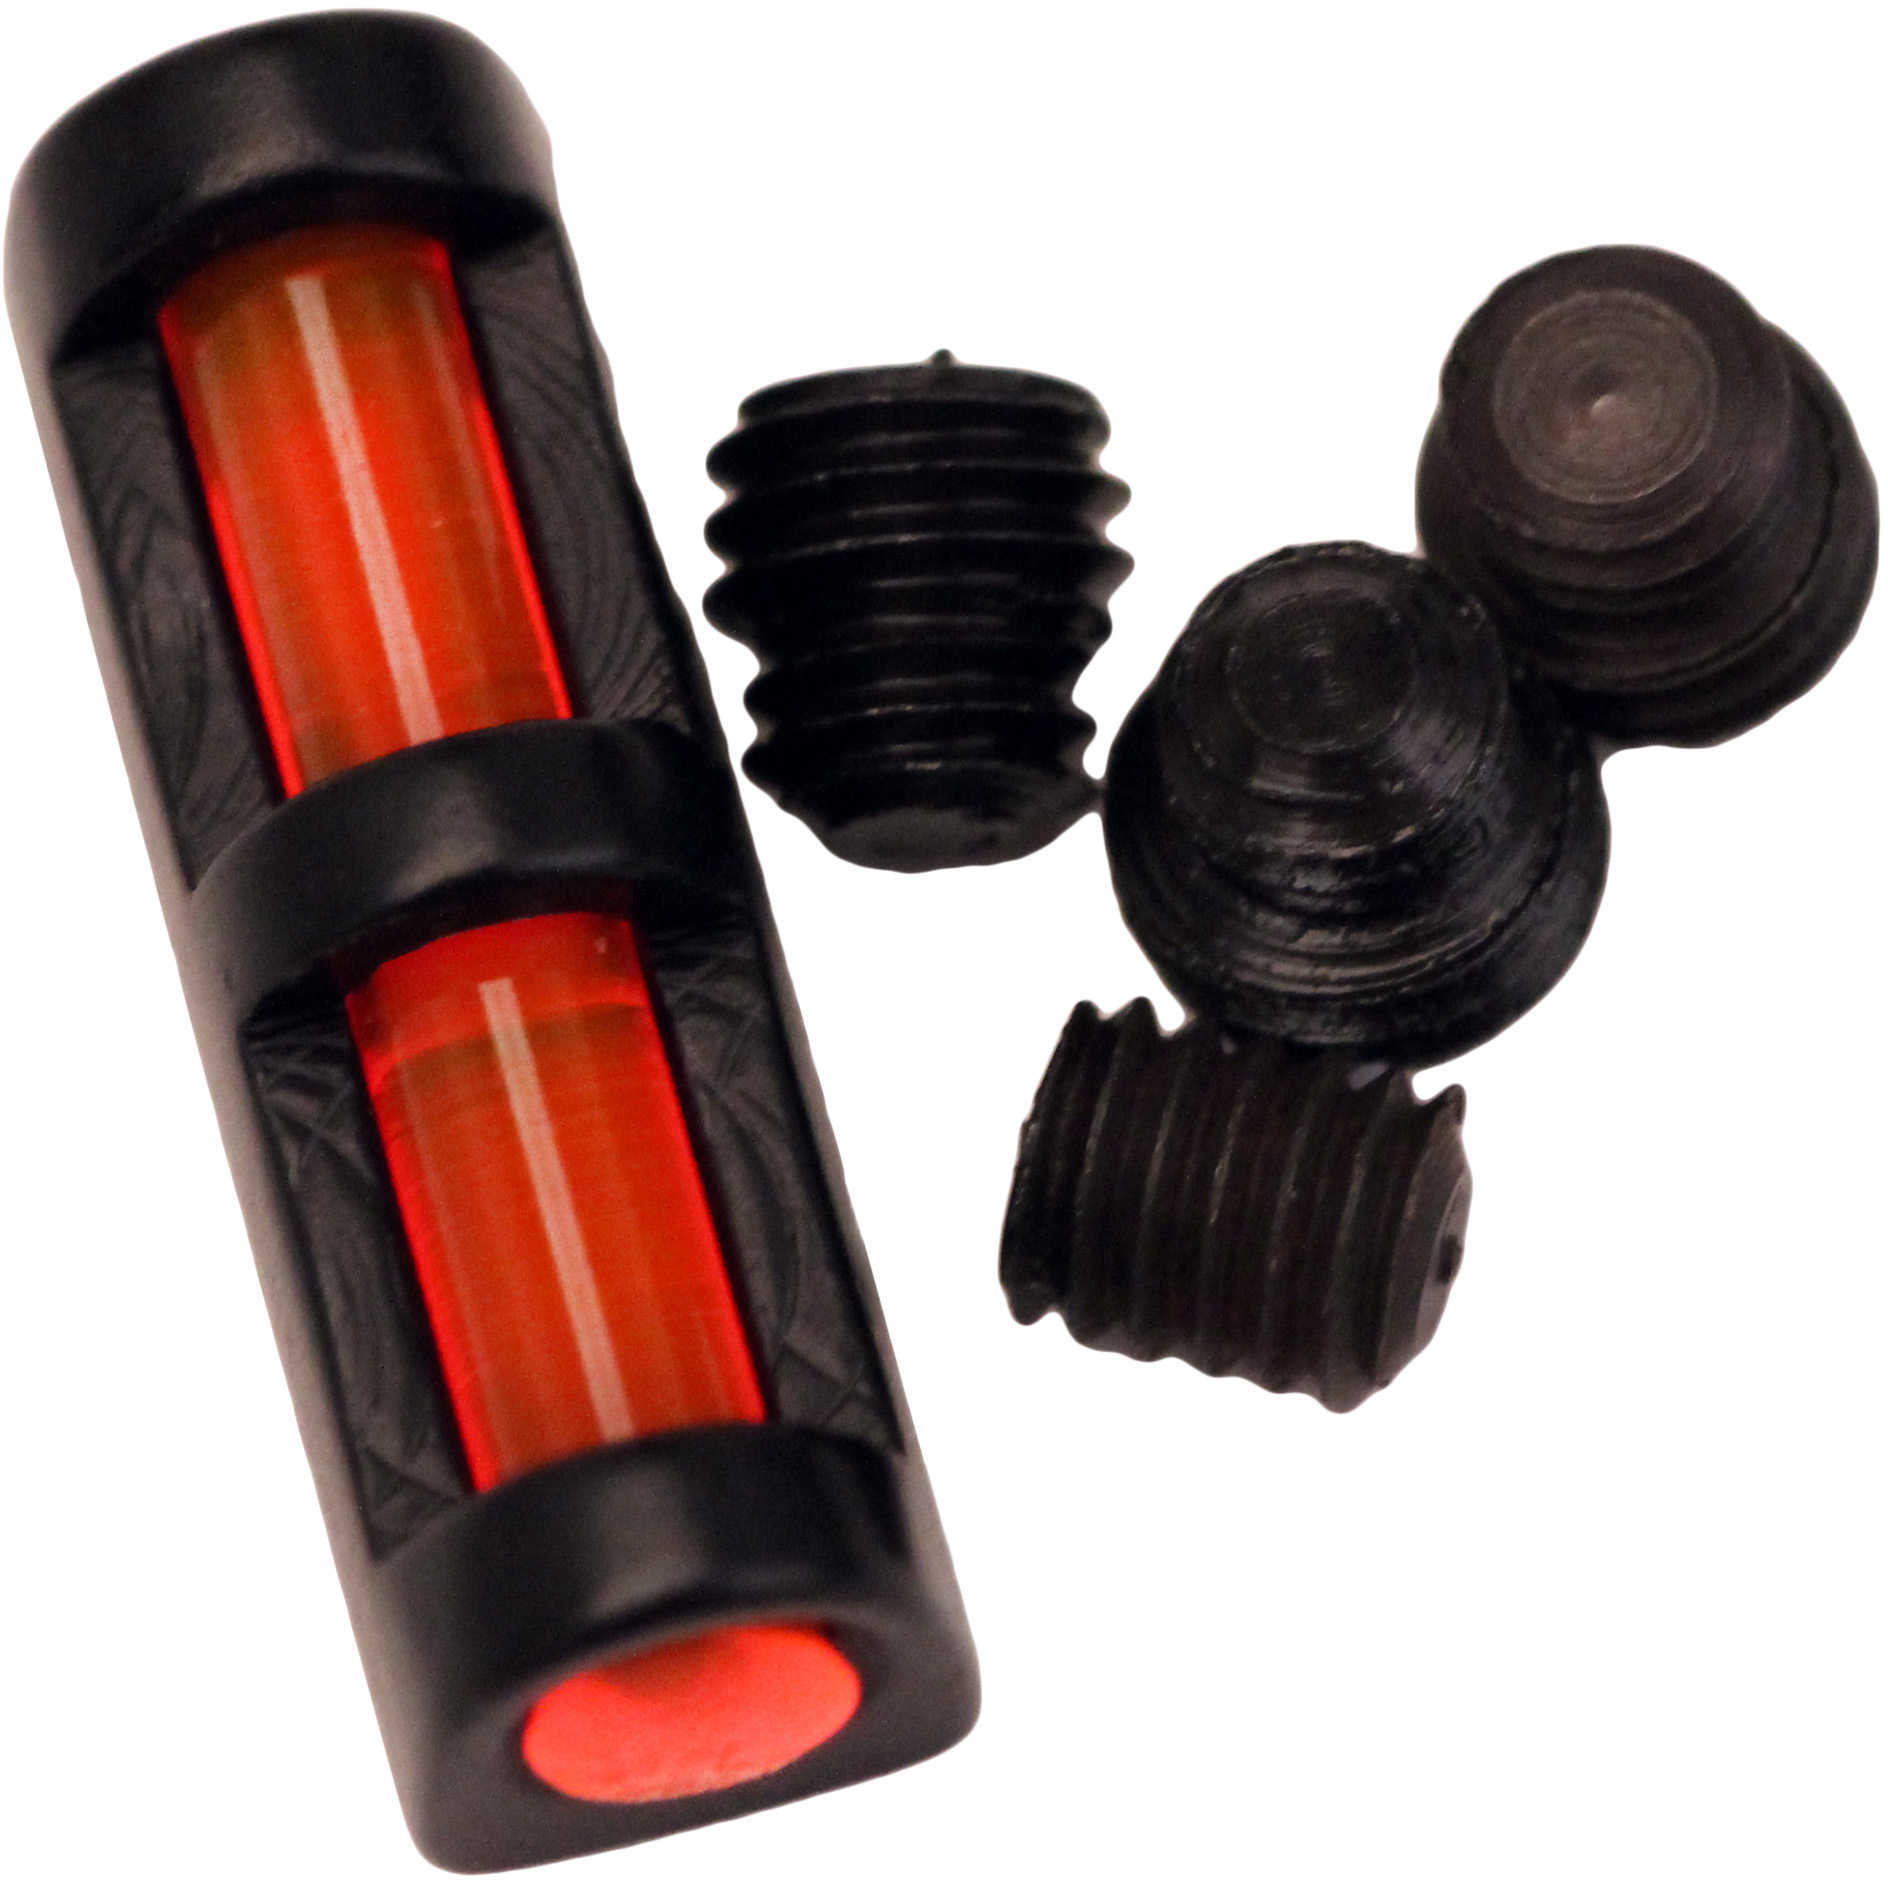 Truglo Sight Long Bead Red W/Universal Thread ADAPTERS